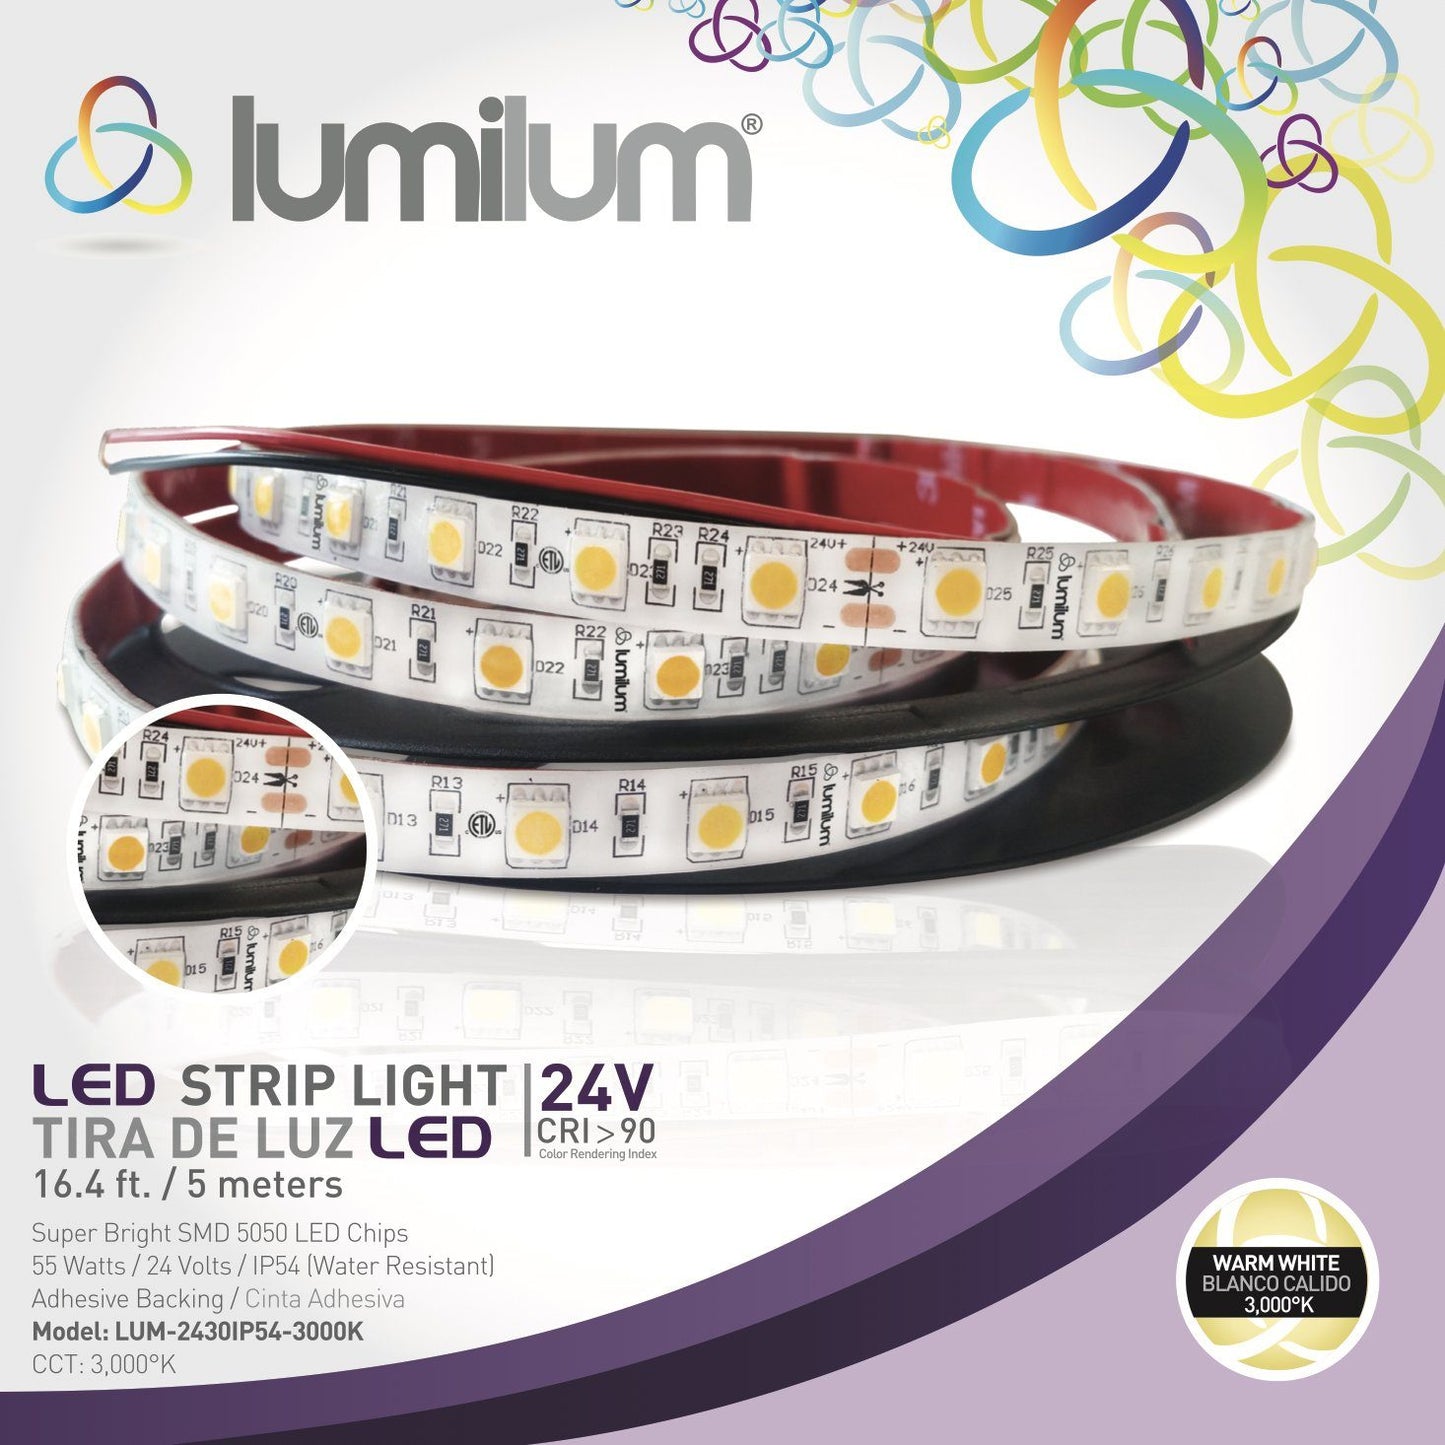 lumilum brand purple led strip light packaging with strip light image and 3000k product information text